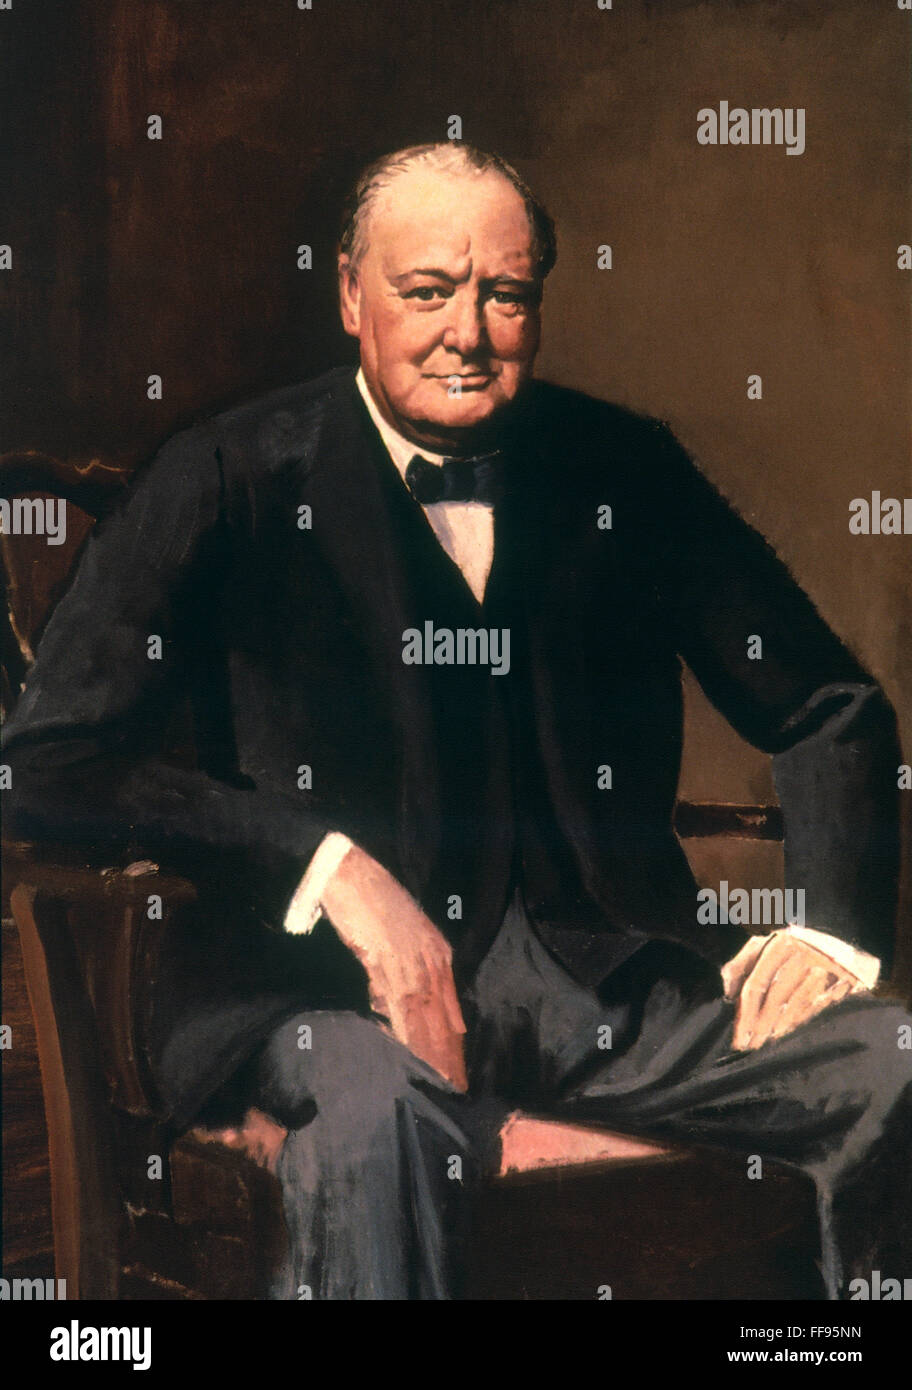 WINSTON CHURCHILL /n(1874-1965). British statesman and author. Painting, 1940, by Captain Cuthbert Orde. EDITORIAL USE ONLY. Stock Photo